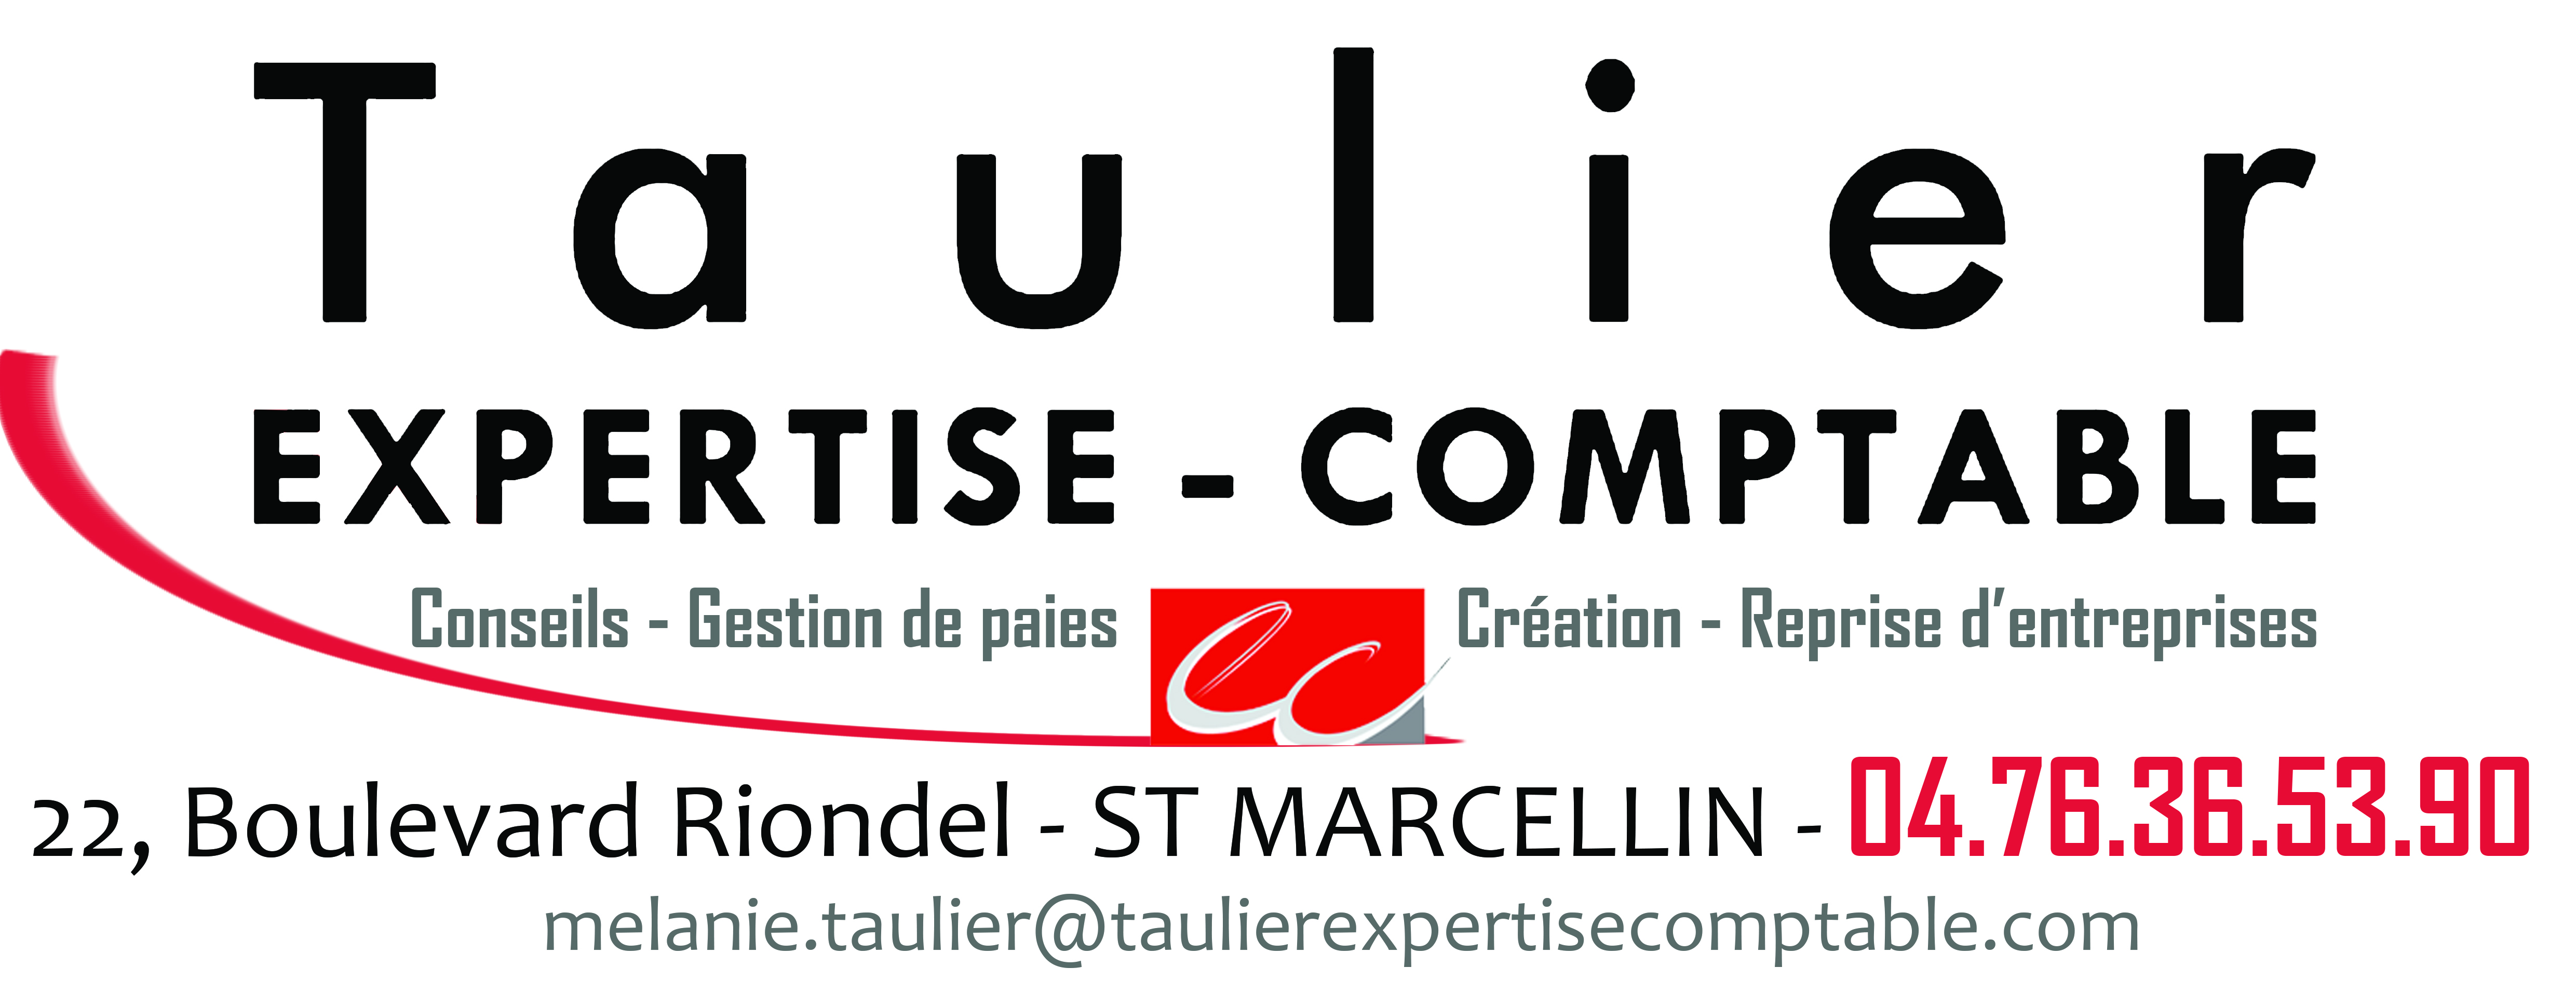 Taulier Expertise Comptable